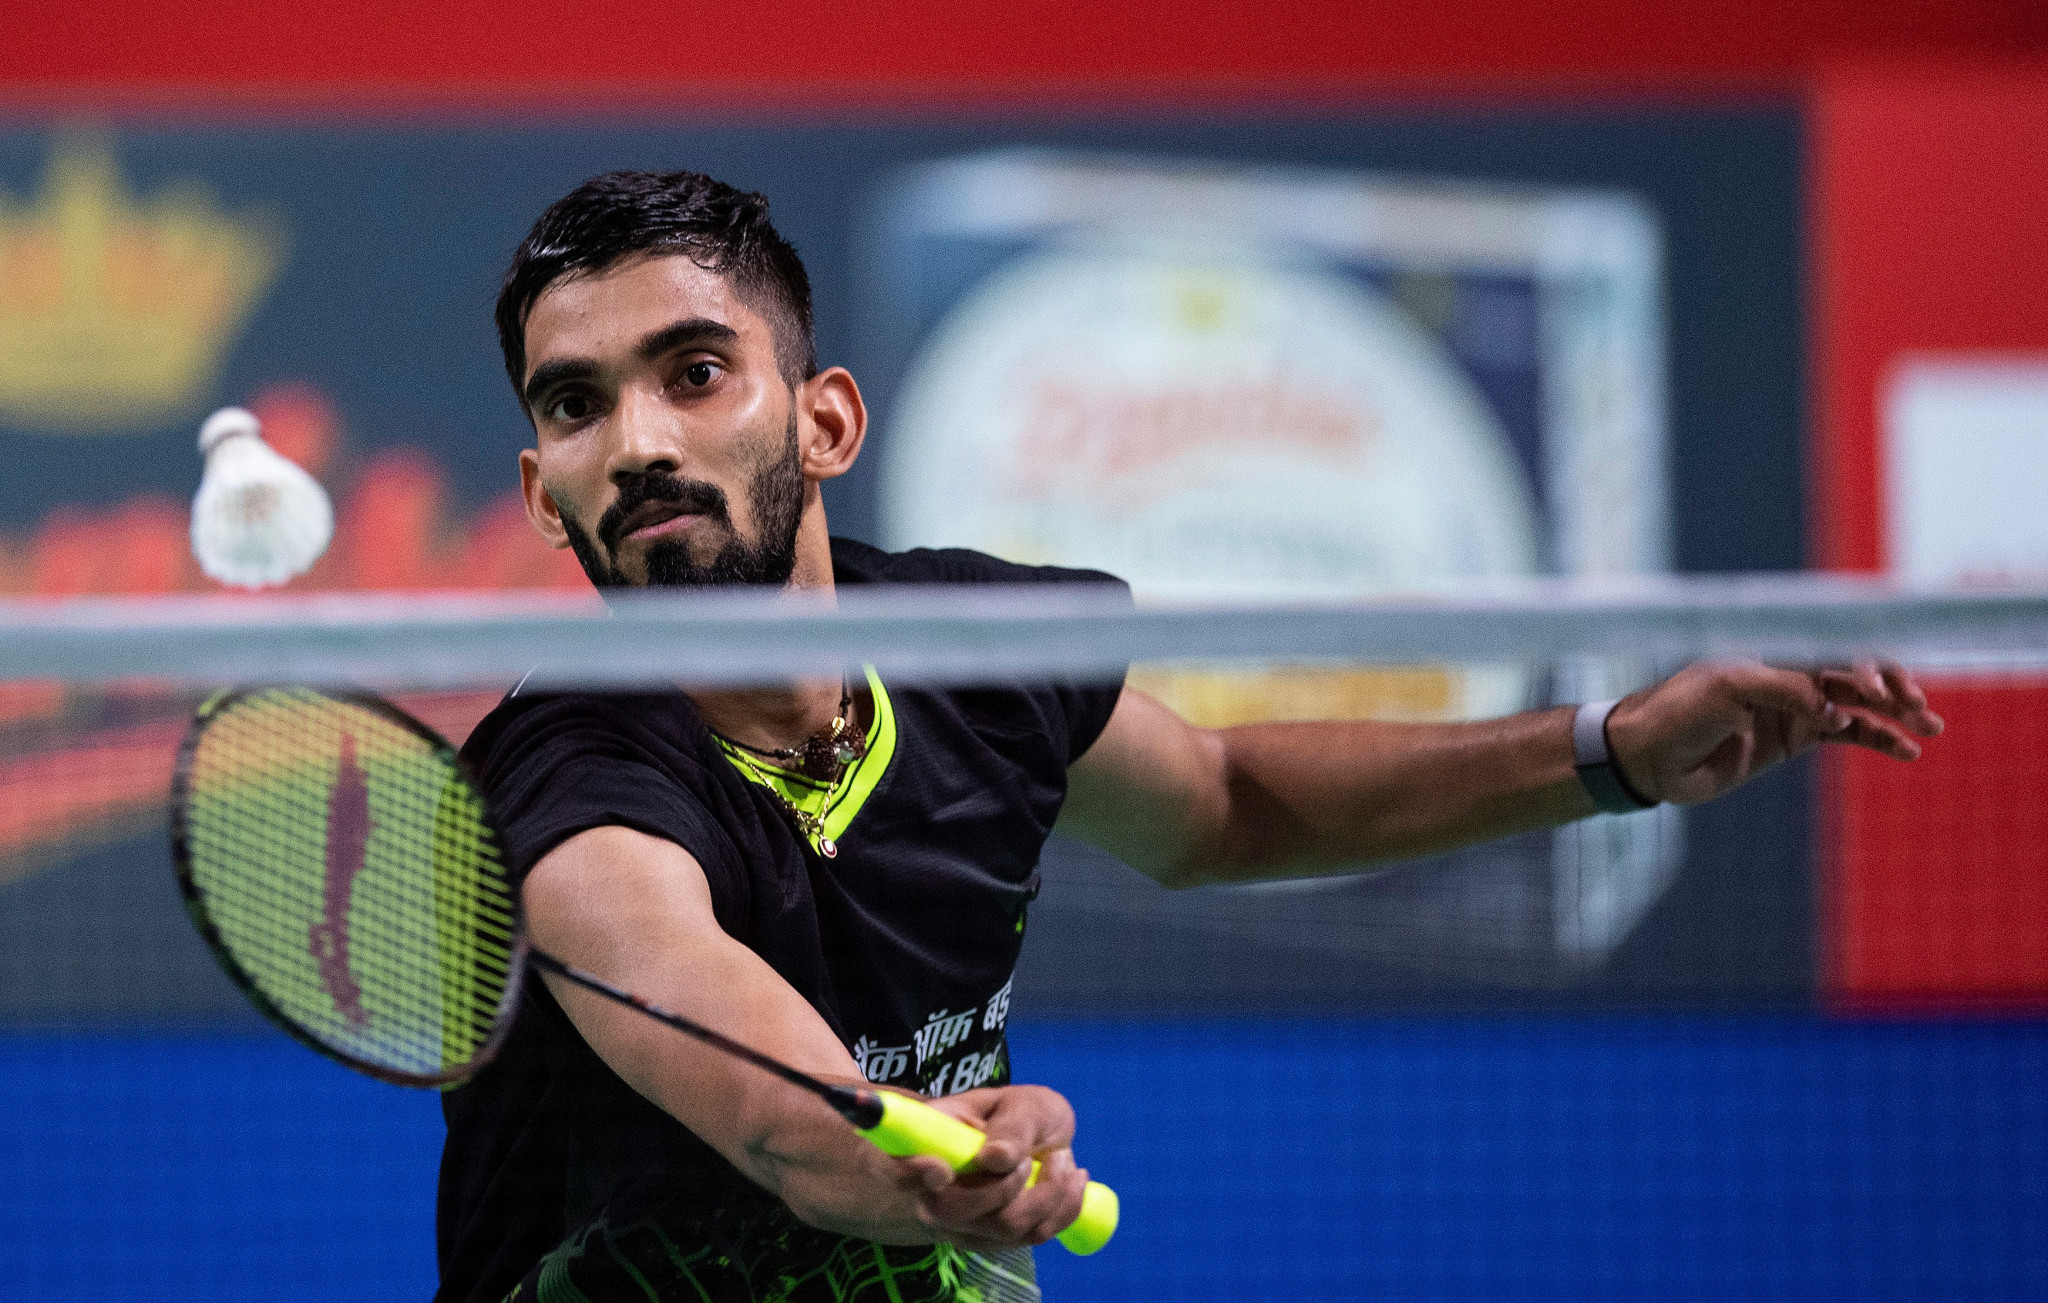 India's Srikanth Kidambi has booked his place in the last eight of the men's singles draw ©Getty Images